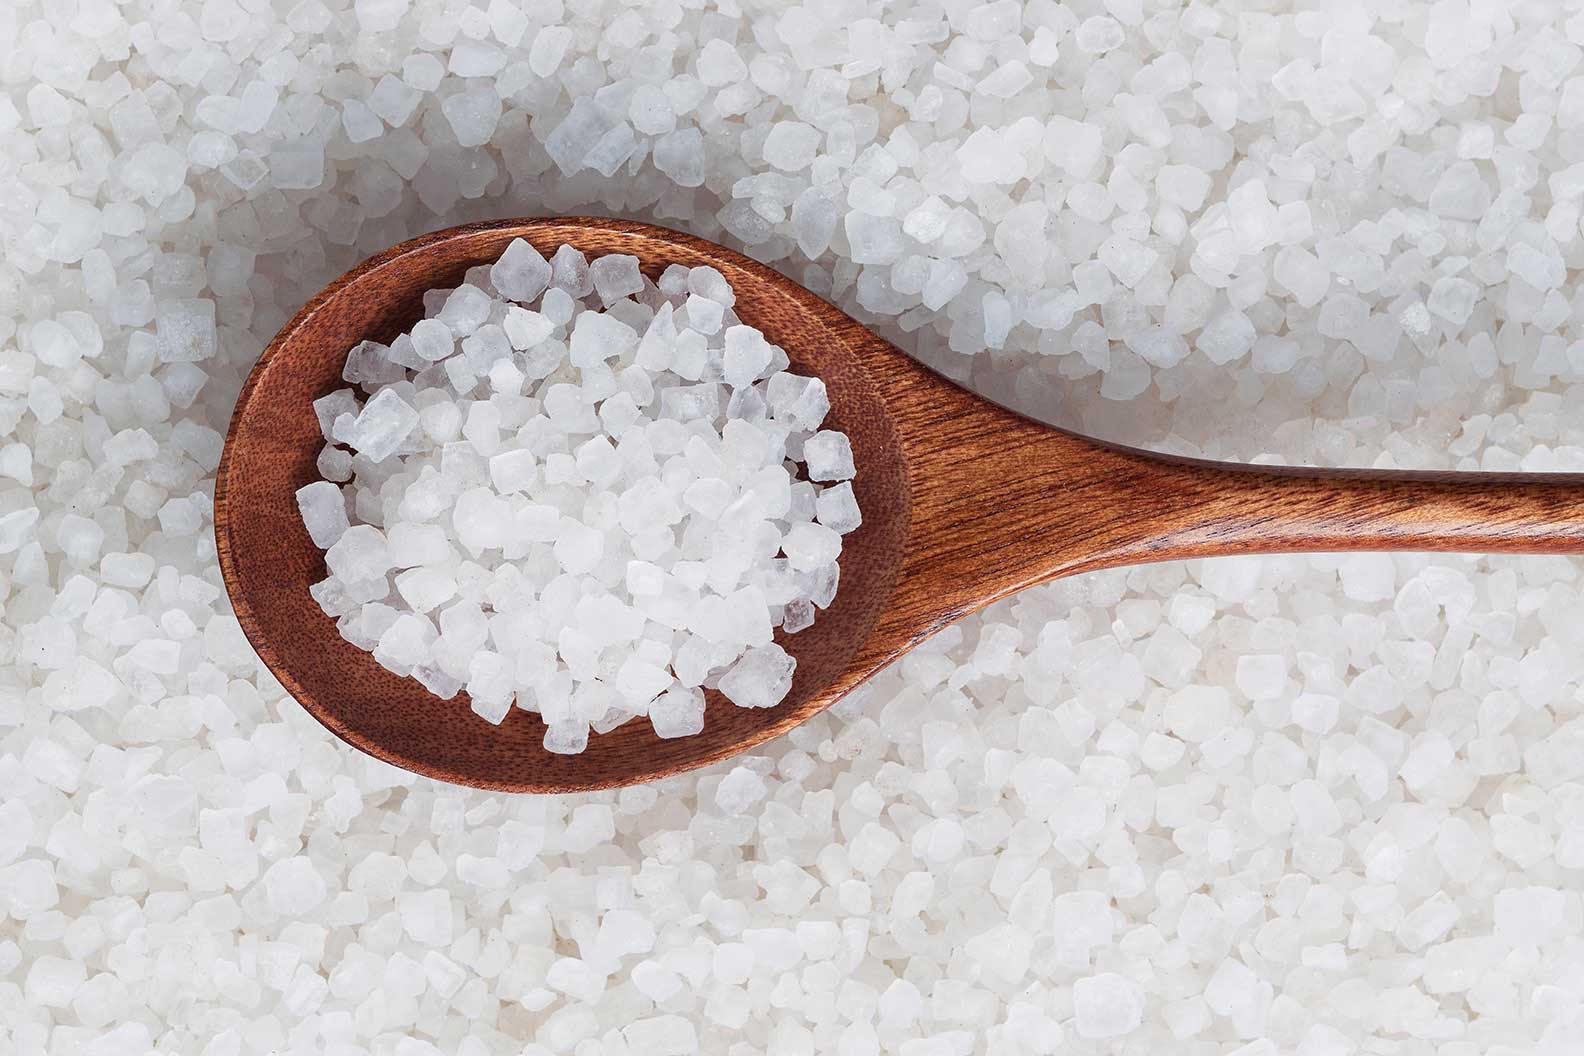 How much salt does it really take to harm your heart